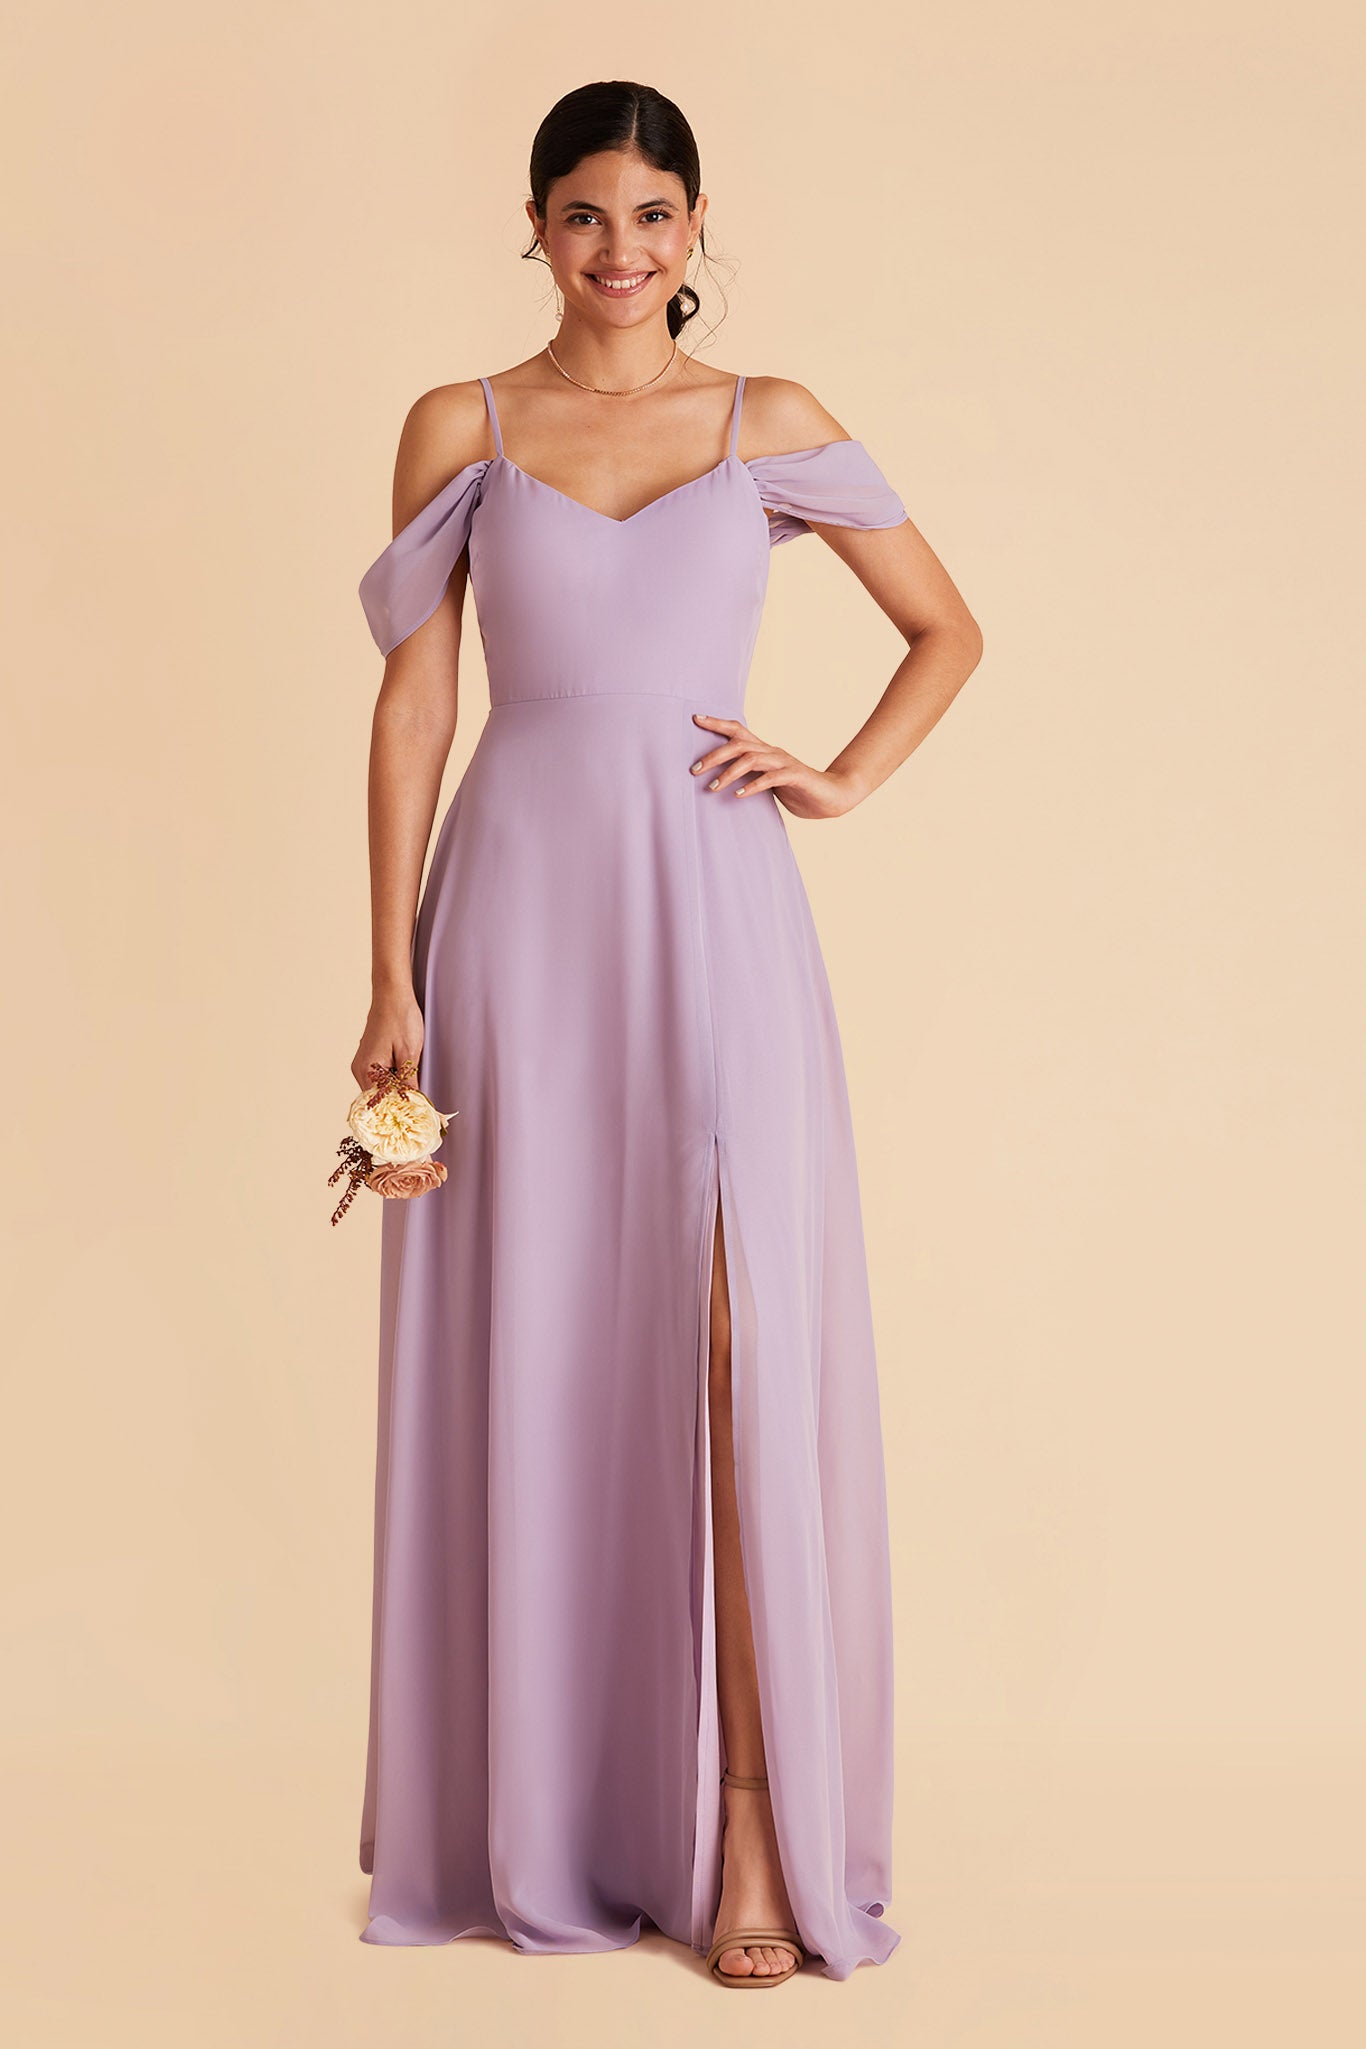 Devin Convertible Chiffon Bridesmaid Dress with Slit in Blush Pink